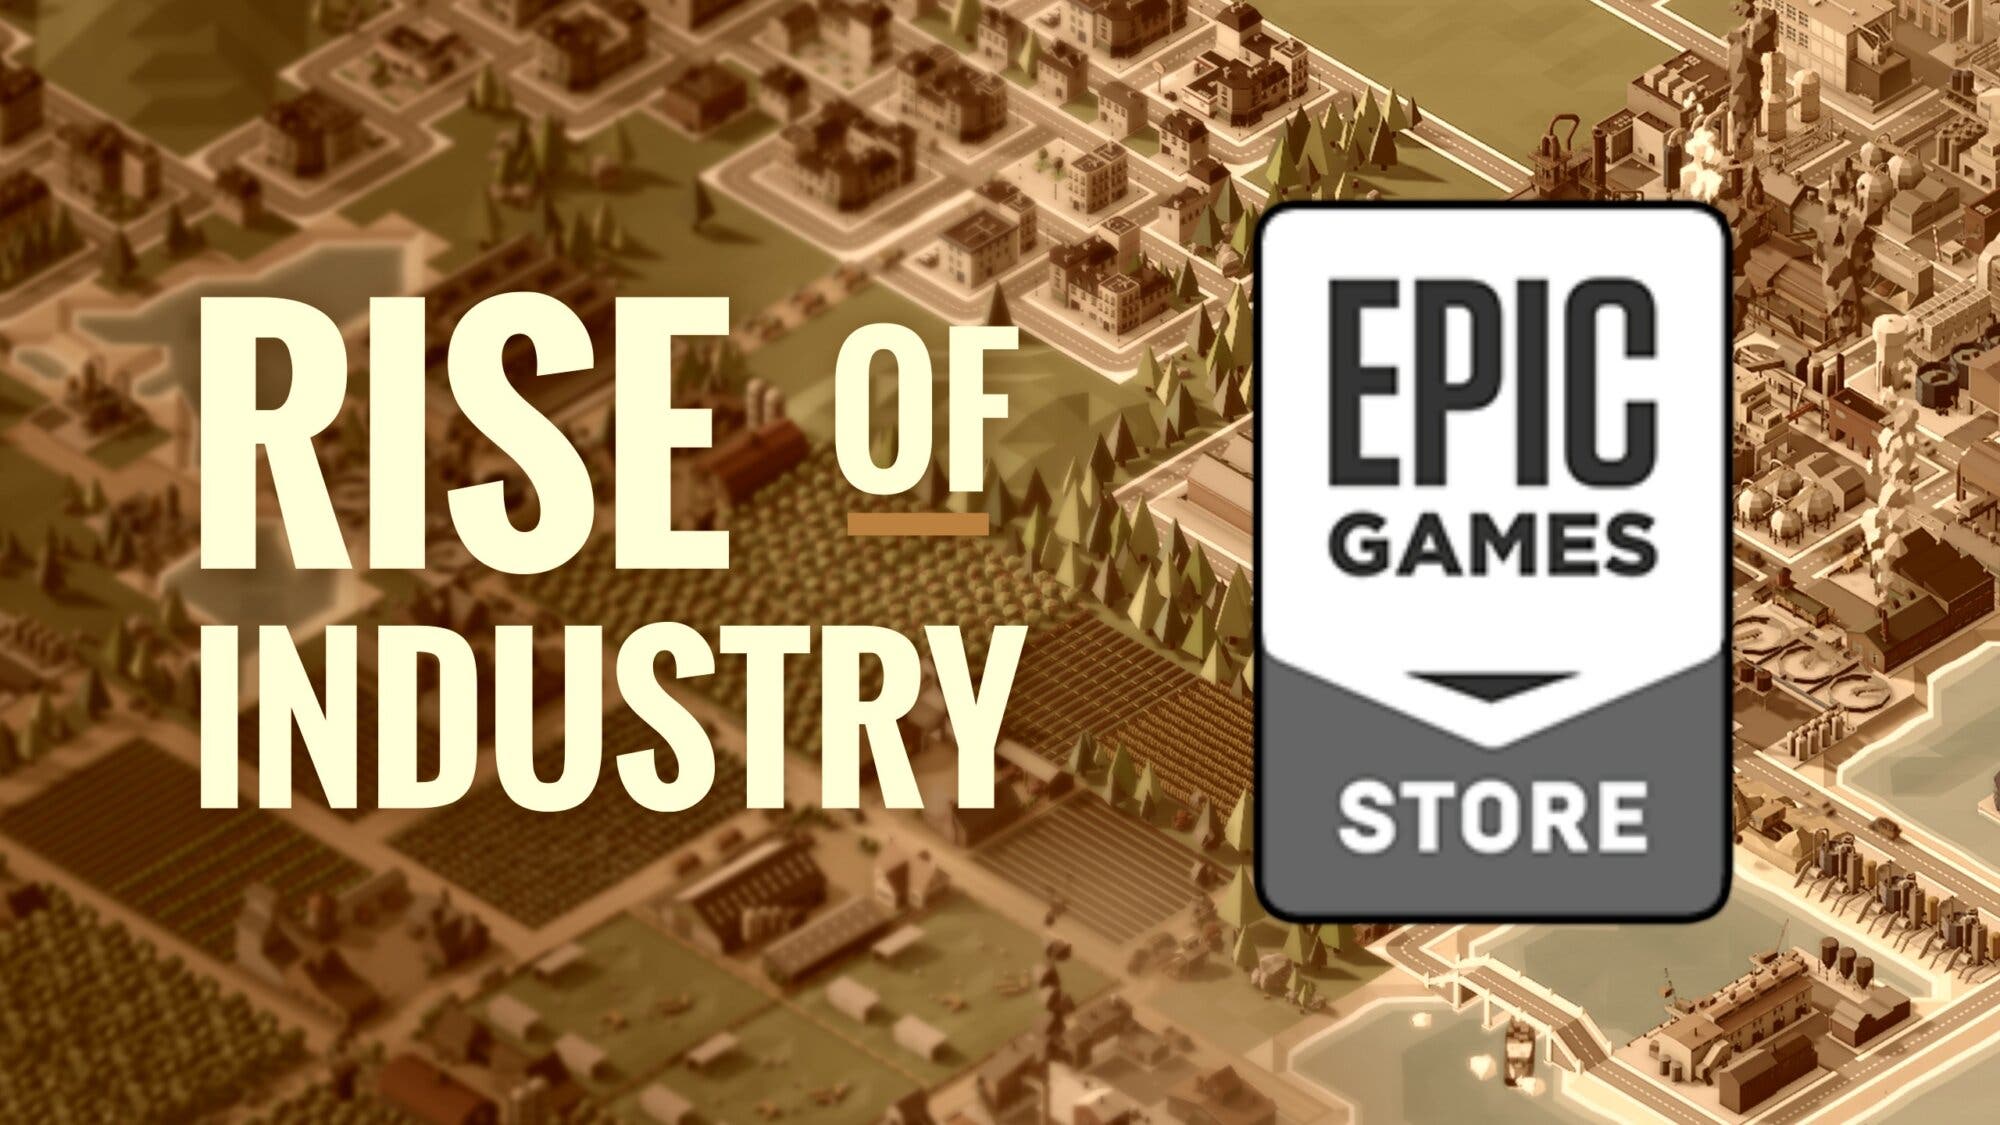 The new Epic Games Store free game is out now, what will they be giving away next week?